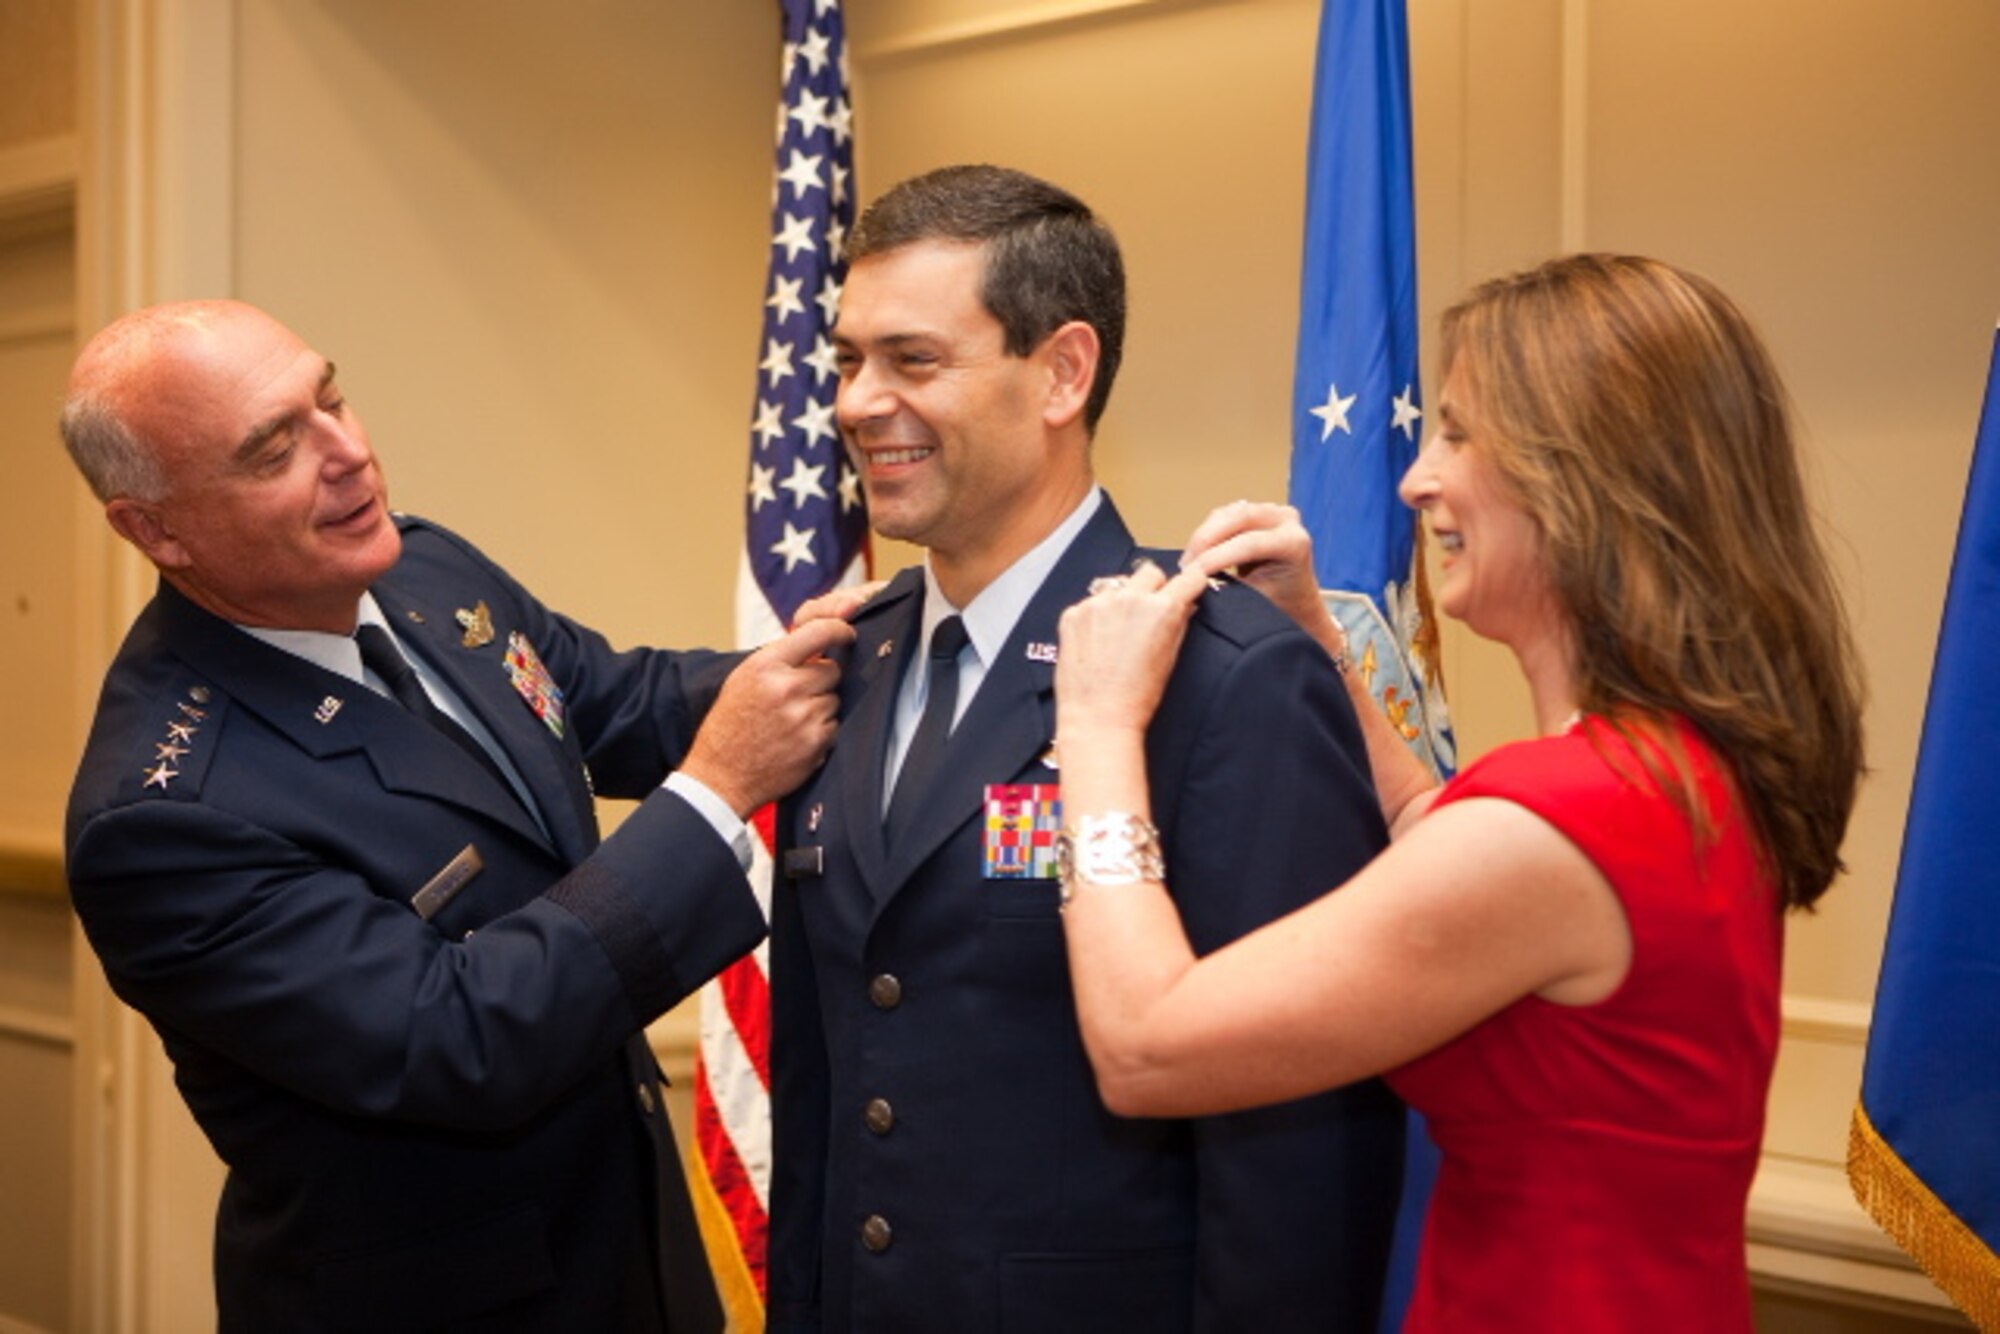 General Carroll "Howie" Chandler and Cindy Wilsbach each pin a star onto the epaulets of Brig. Gen. Kenneth Wilsbach, 18th Wing commander, during a ceremony in Washington D.C. (U.S. Air Force photo / Matt Harmon)